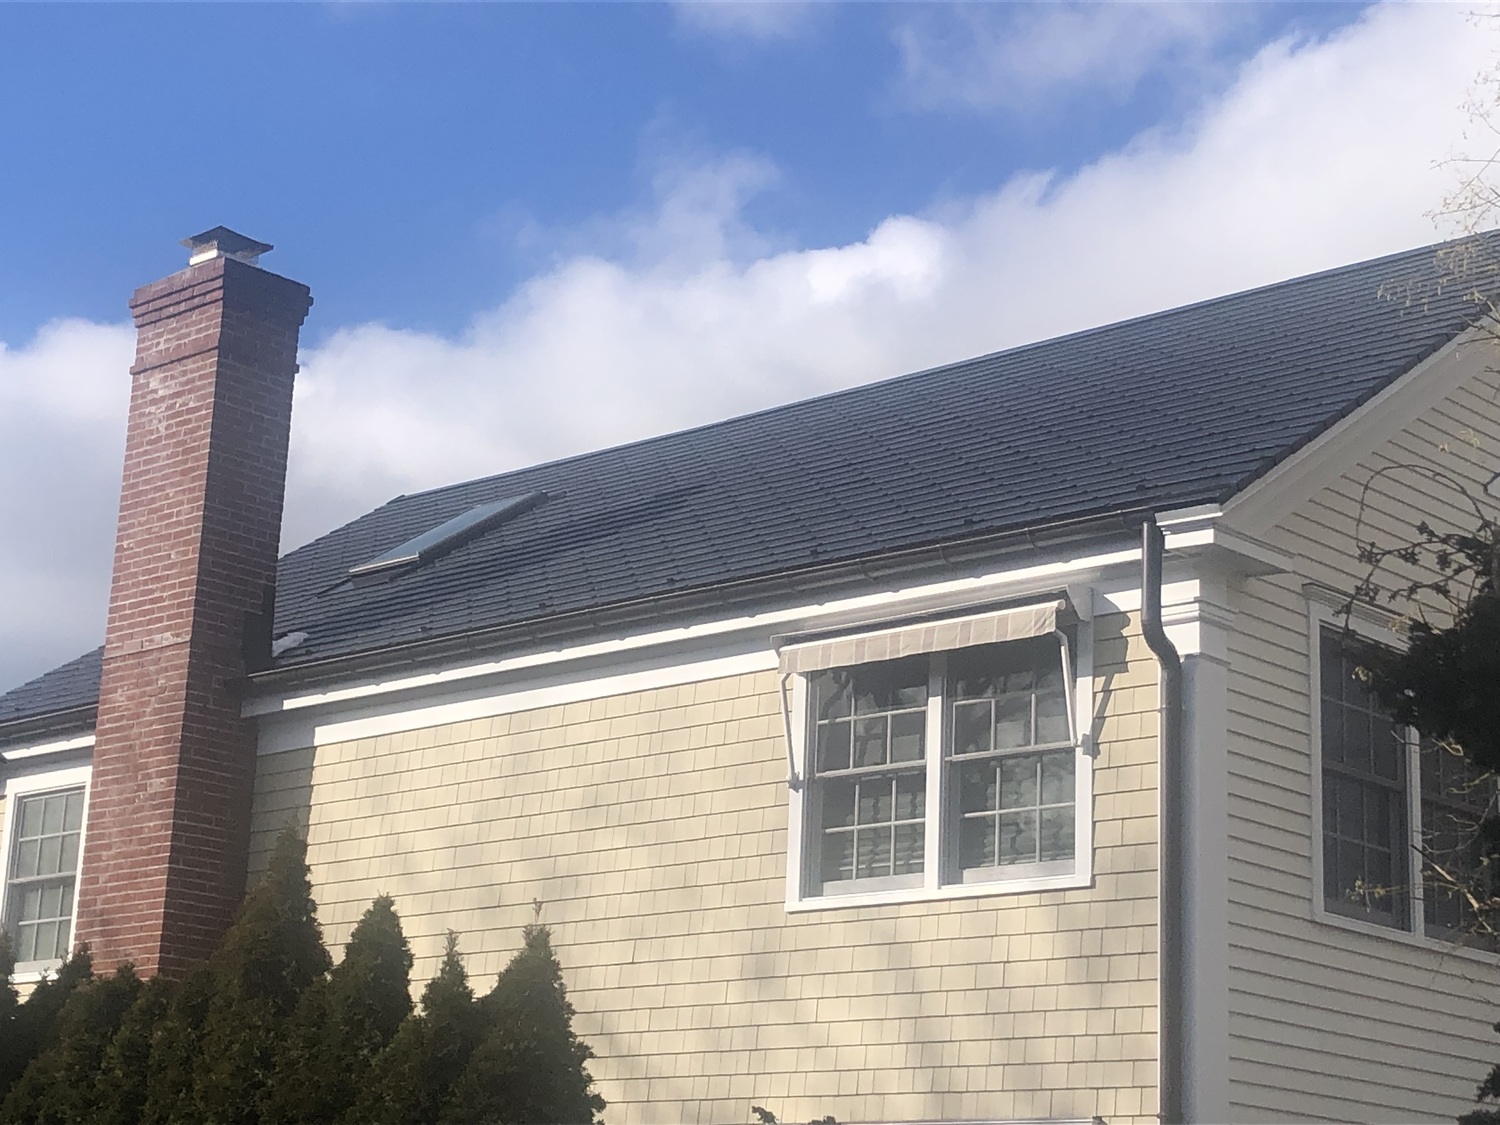 Tesla solar roof shingles in Sag Harbor. They cost more upfront, but are three-times stronger than traditional shingles, and produce clean energy that lowers the electric bill. JENNY NOBLE